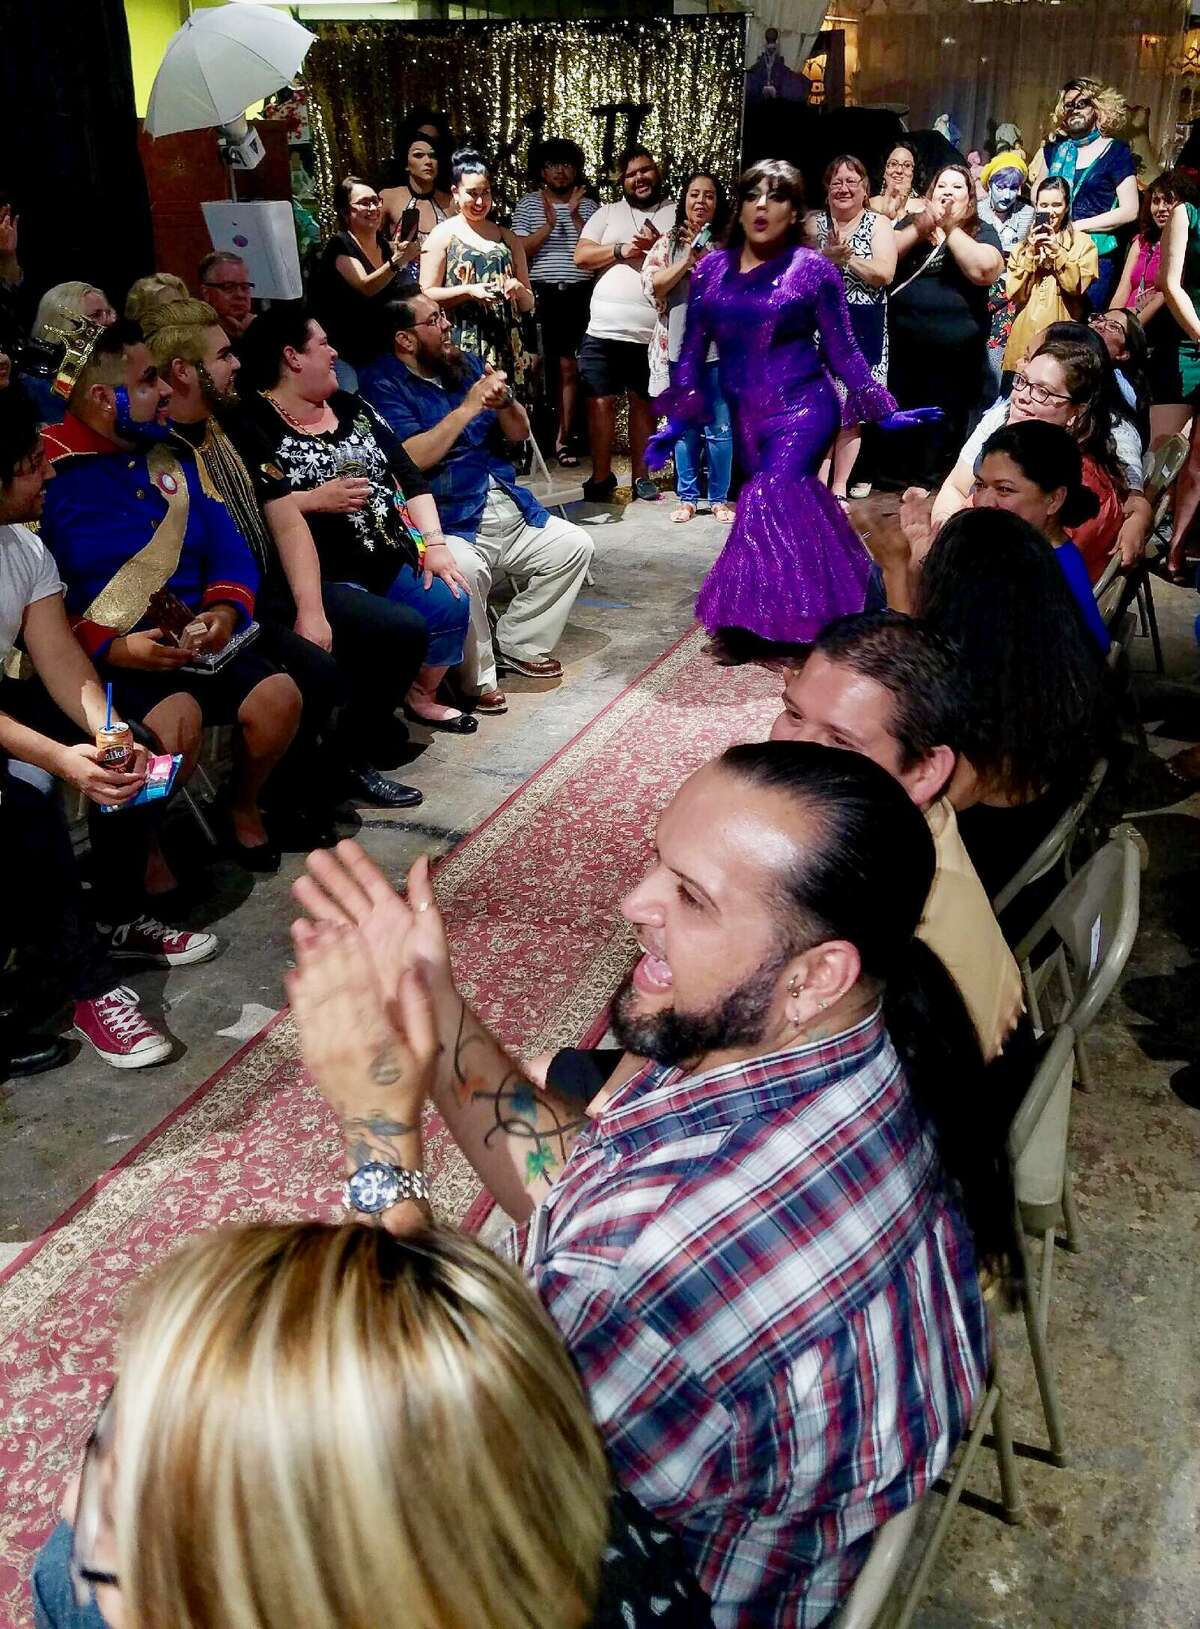 Anthony Diaz, who goes by the stage name of Violetta Slay, lip syncs to a disco melody from Selena as the crowd watches on at the second-installment of MexiQueens, a drag show featuring Latino performers, on May 20, 2017.